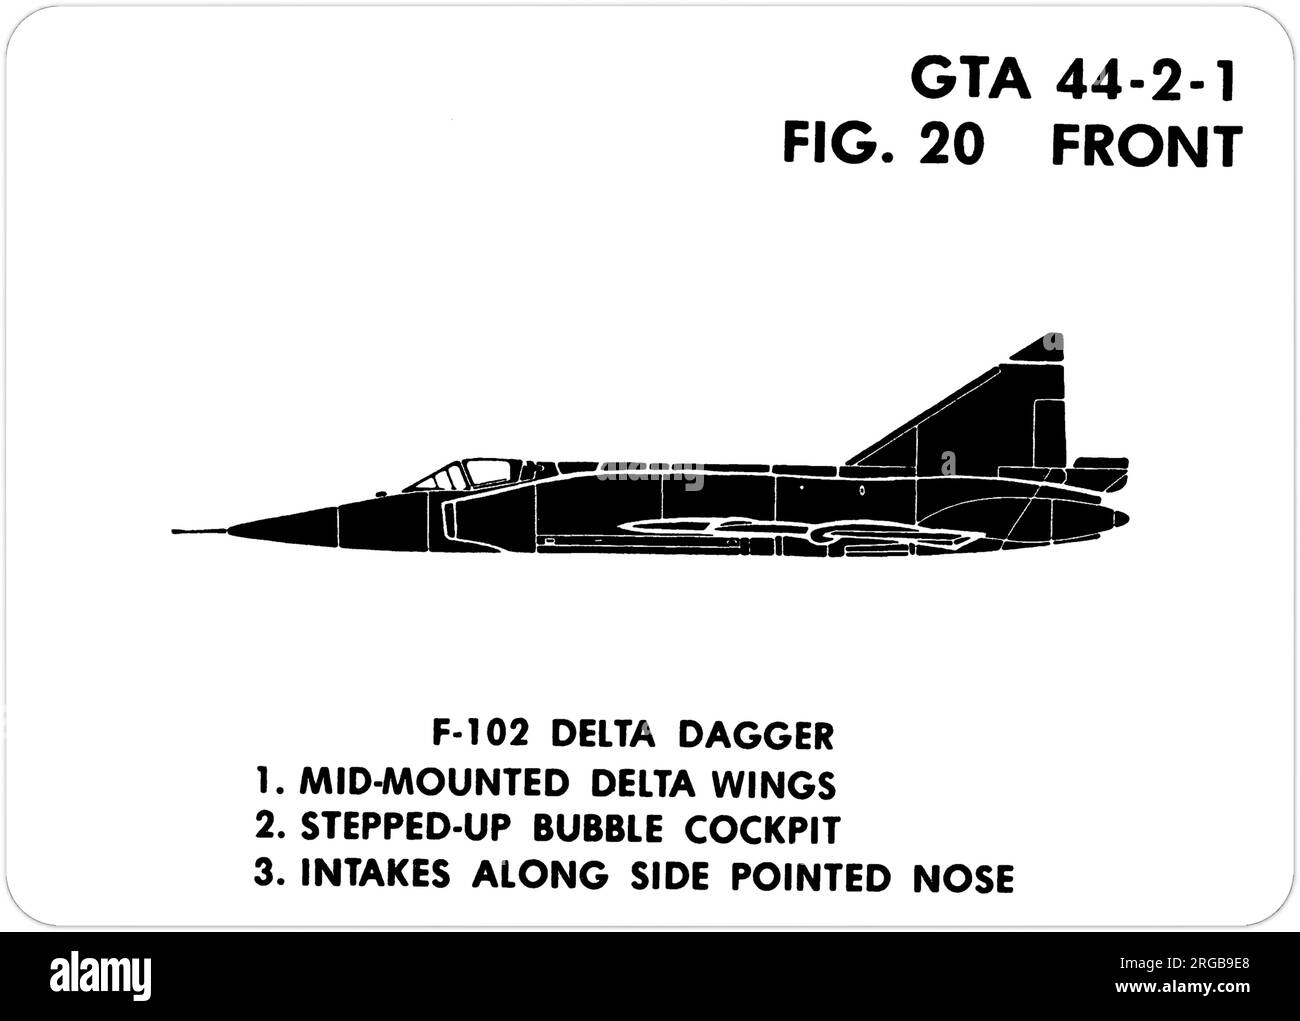 Convair F-102A Delta Dagger. This is one of the series of Graphics Training Aids (GTA) used by the United States Army to train their personnel to recognize friendly and hostile aircraft. This particular set, GTA 44-2-1, was issued in July1977. The set features aircraft from: Canada, Italy, United Kingdom, United States, and the USSR. Stock Photo